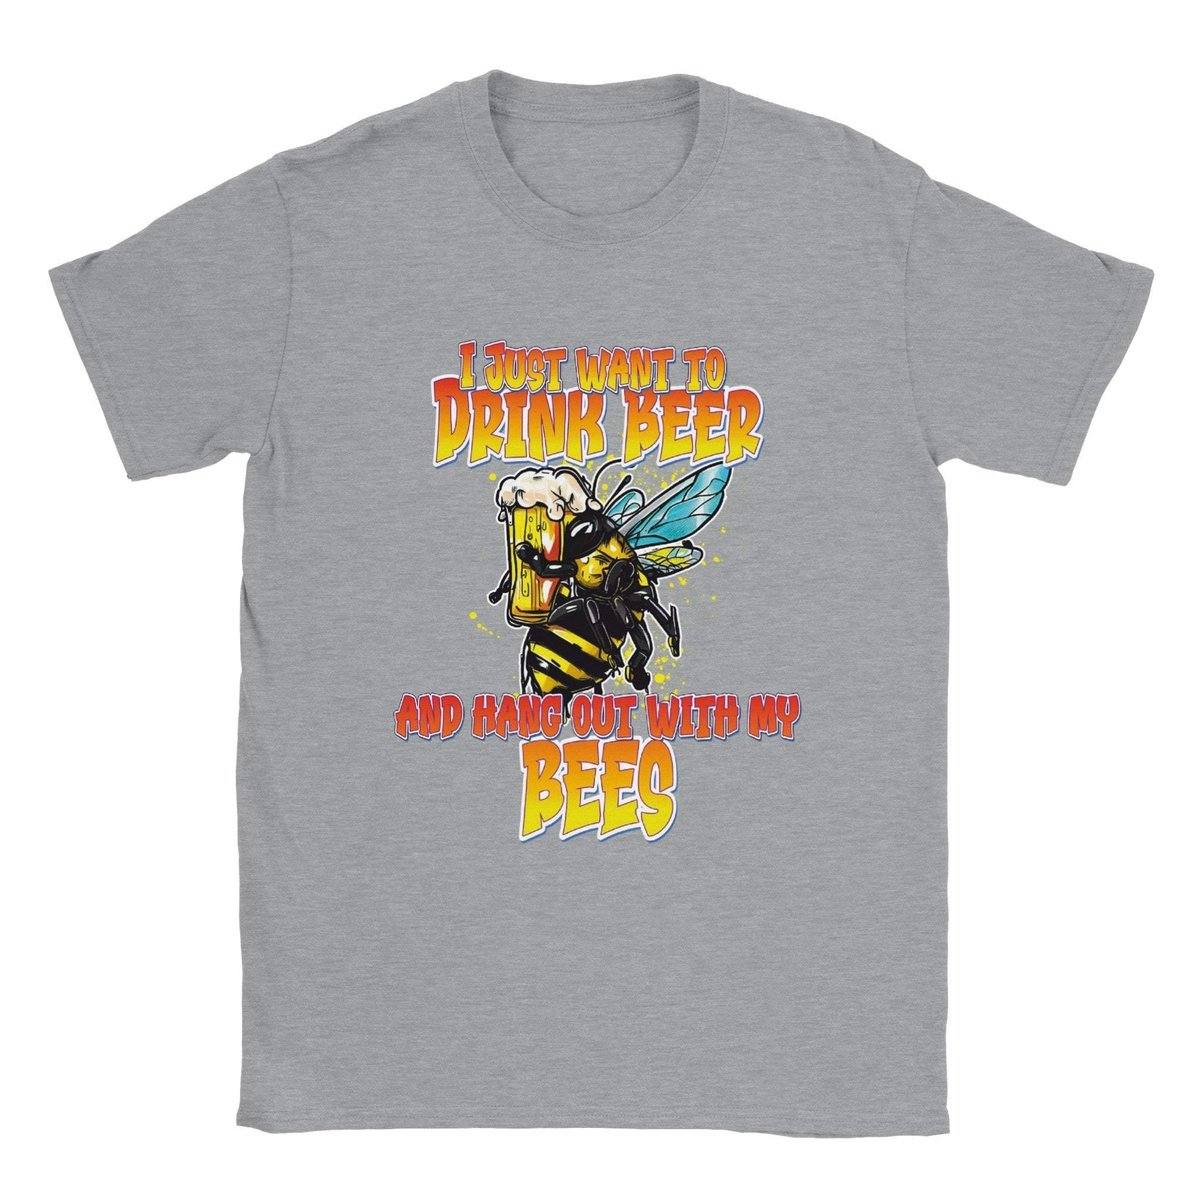 I just want to drink beer and hang out with my bees - Classic Unisex Crewneck T-shirt Australia Online Color Sports Grey / S